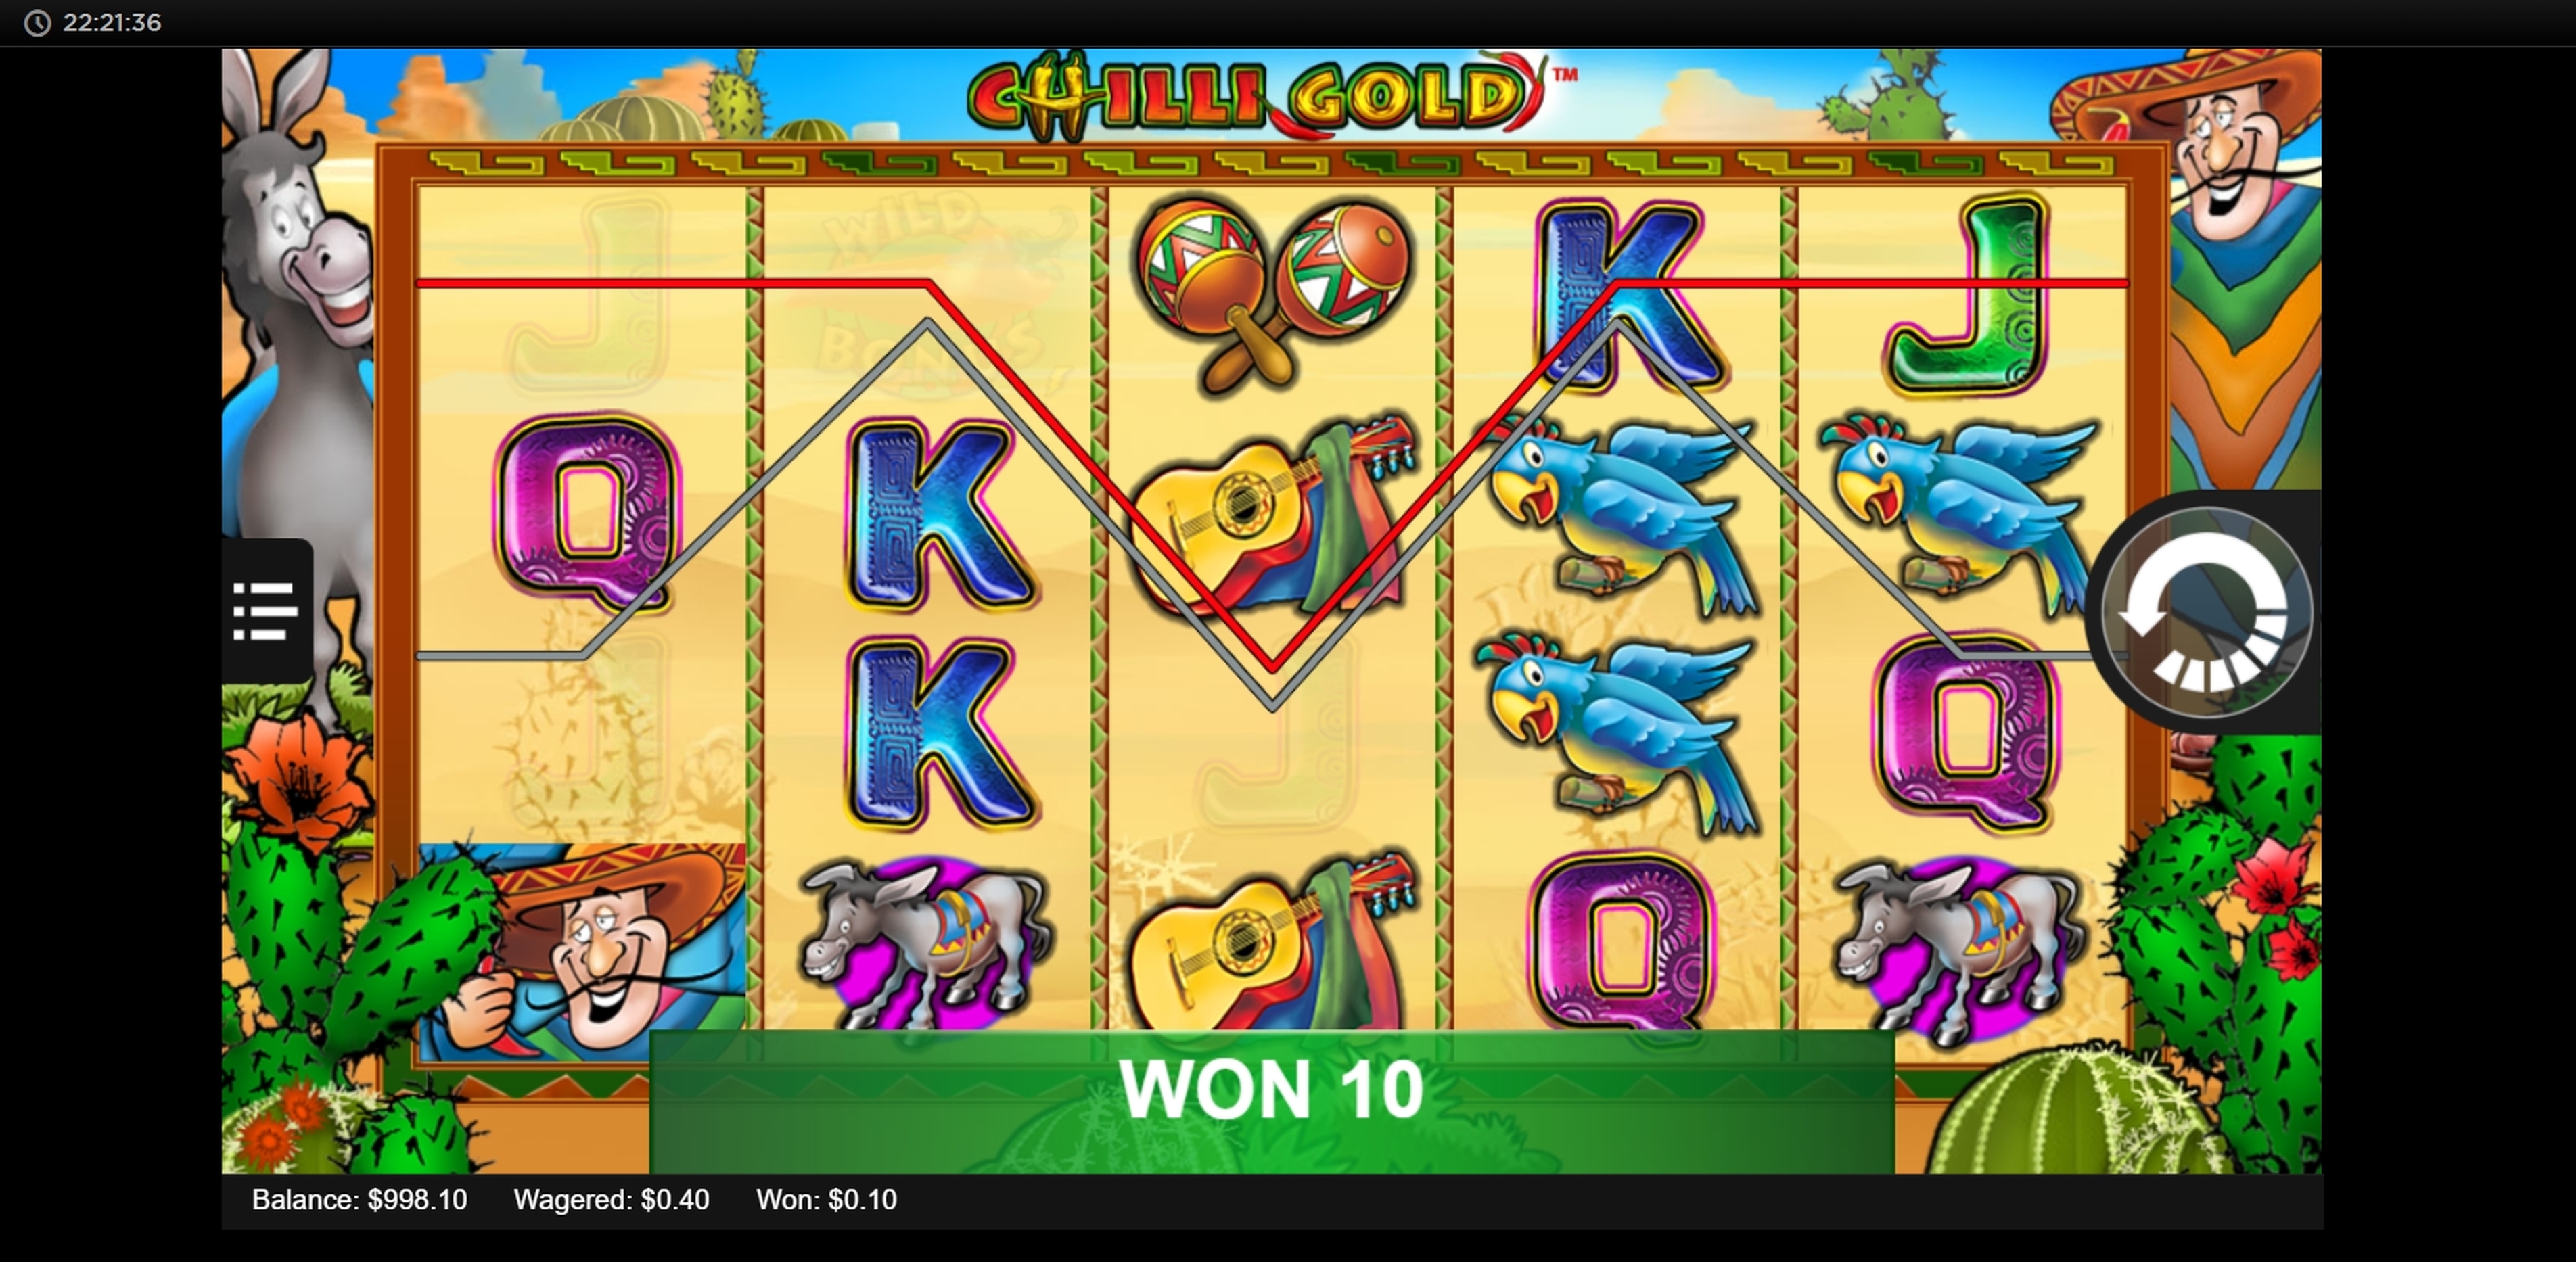 Win Money in Chilli Gold Free Slot Game by Lightning Box